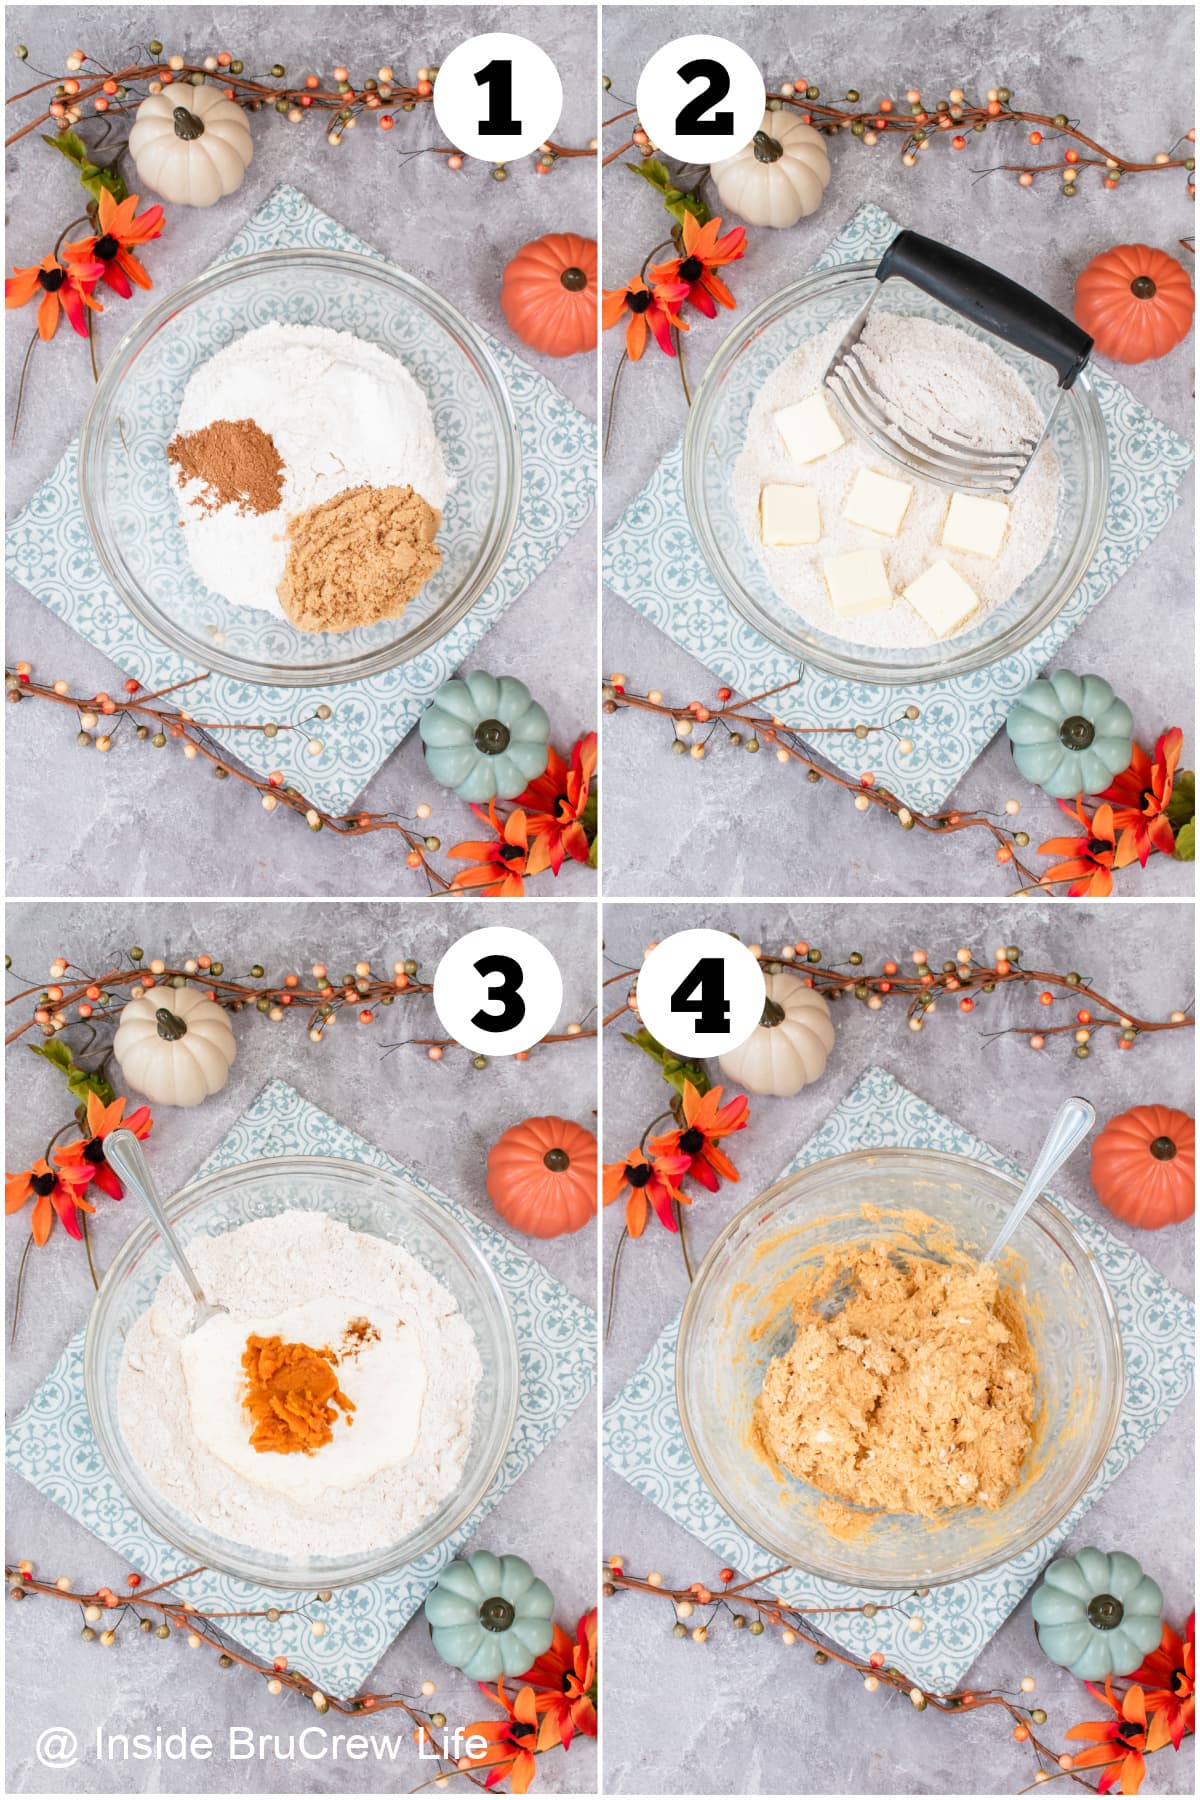 Four pictures collaged together showing how to make pumpkin scones